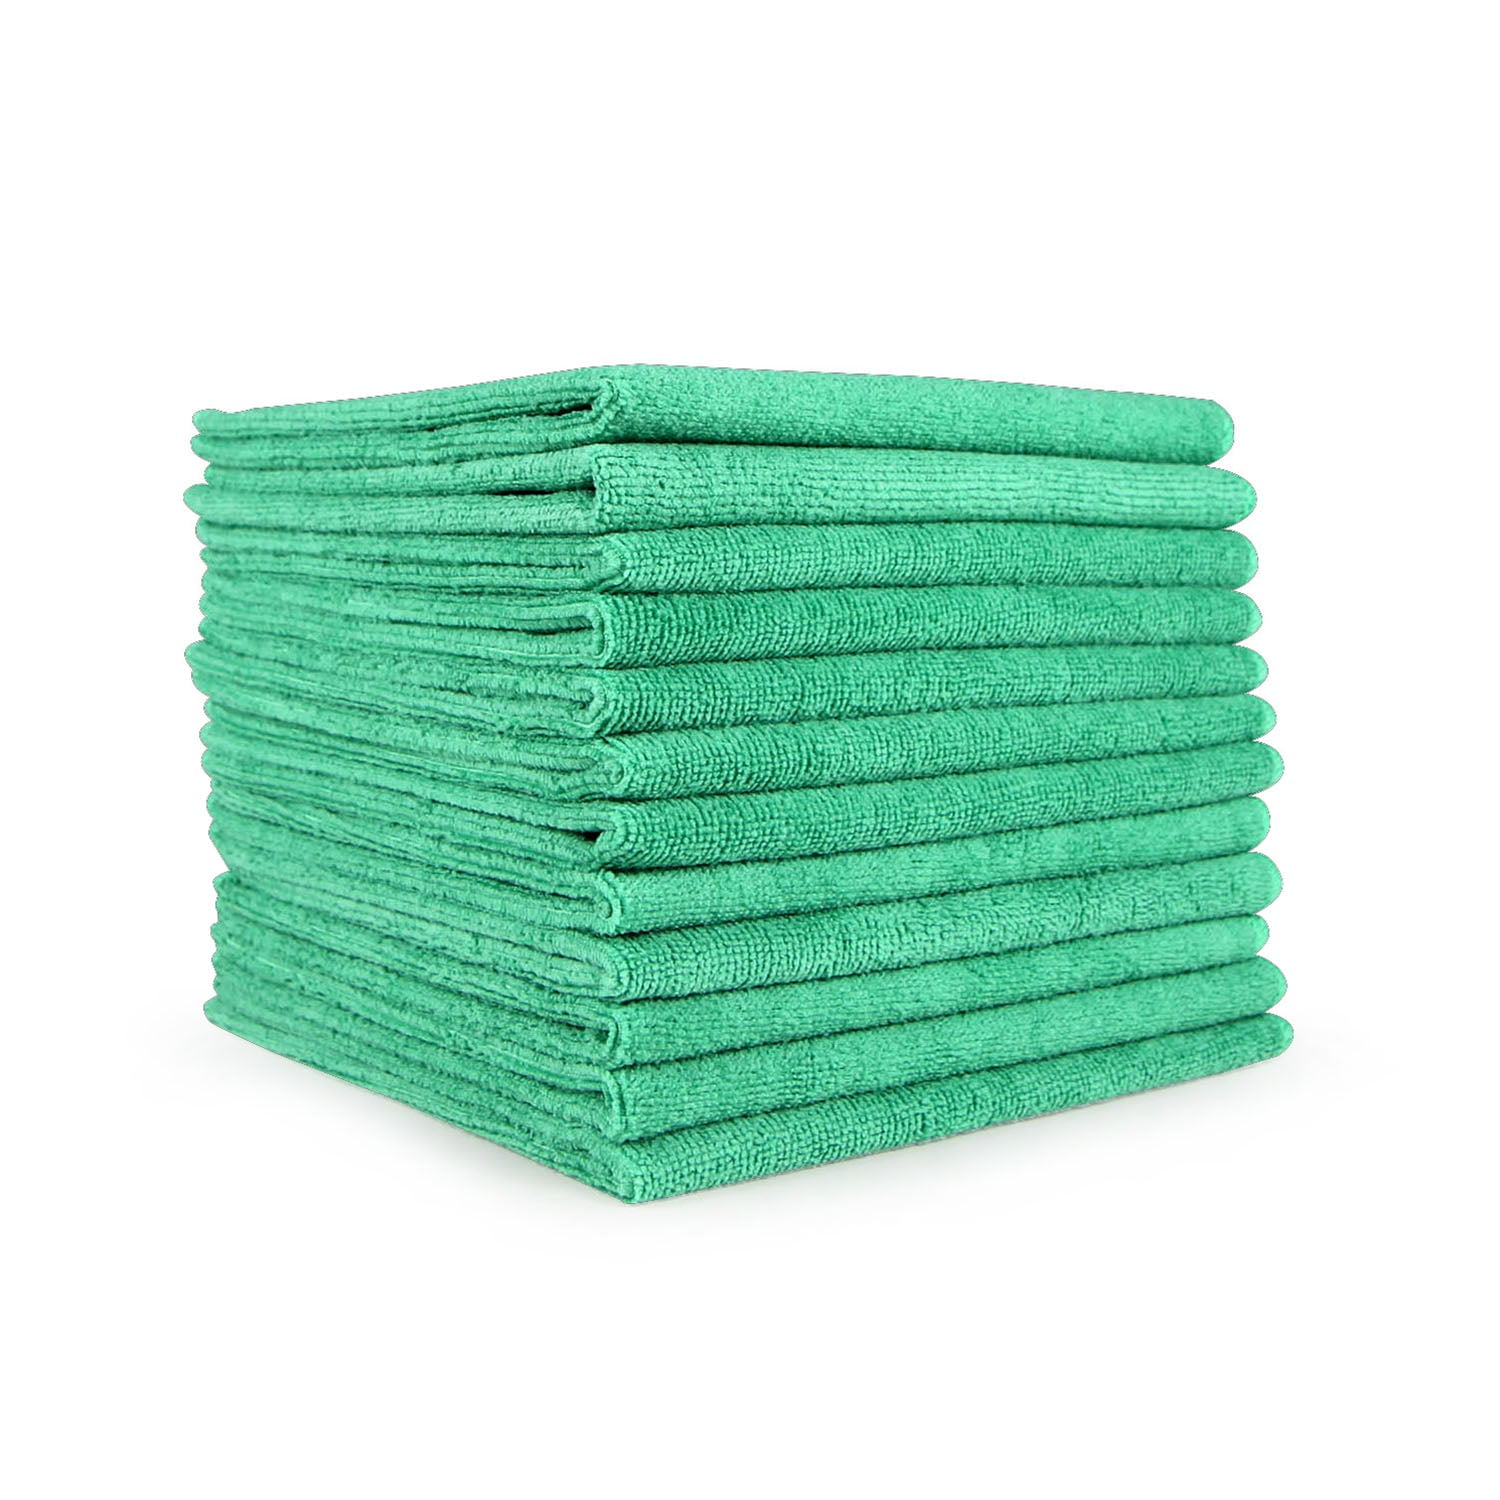 Barista cloth set microfiber / 4 pcs. in 3 sizes / Professional Cleaning